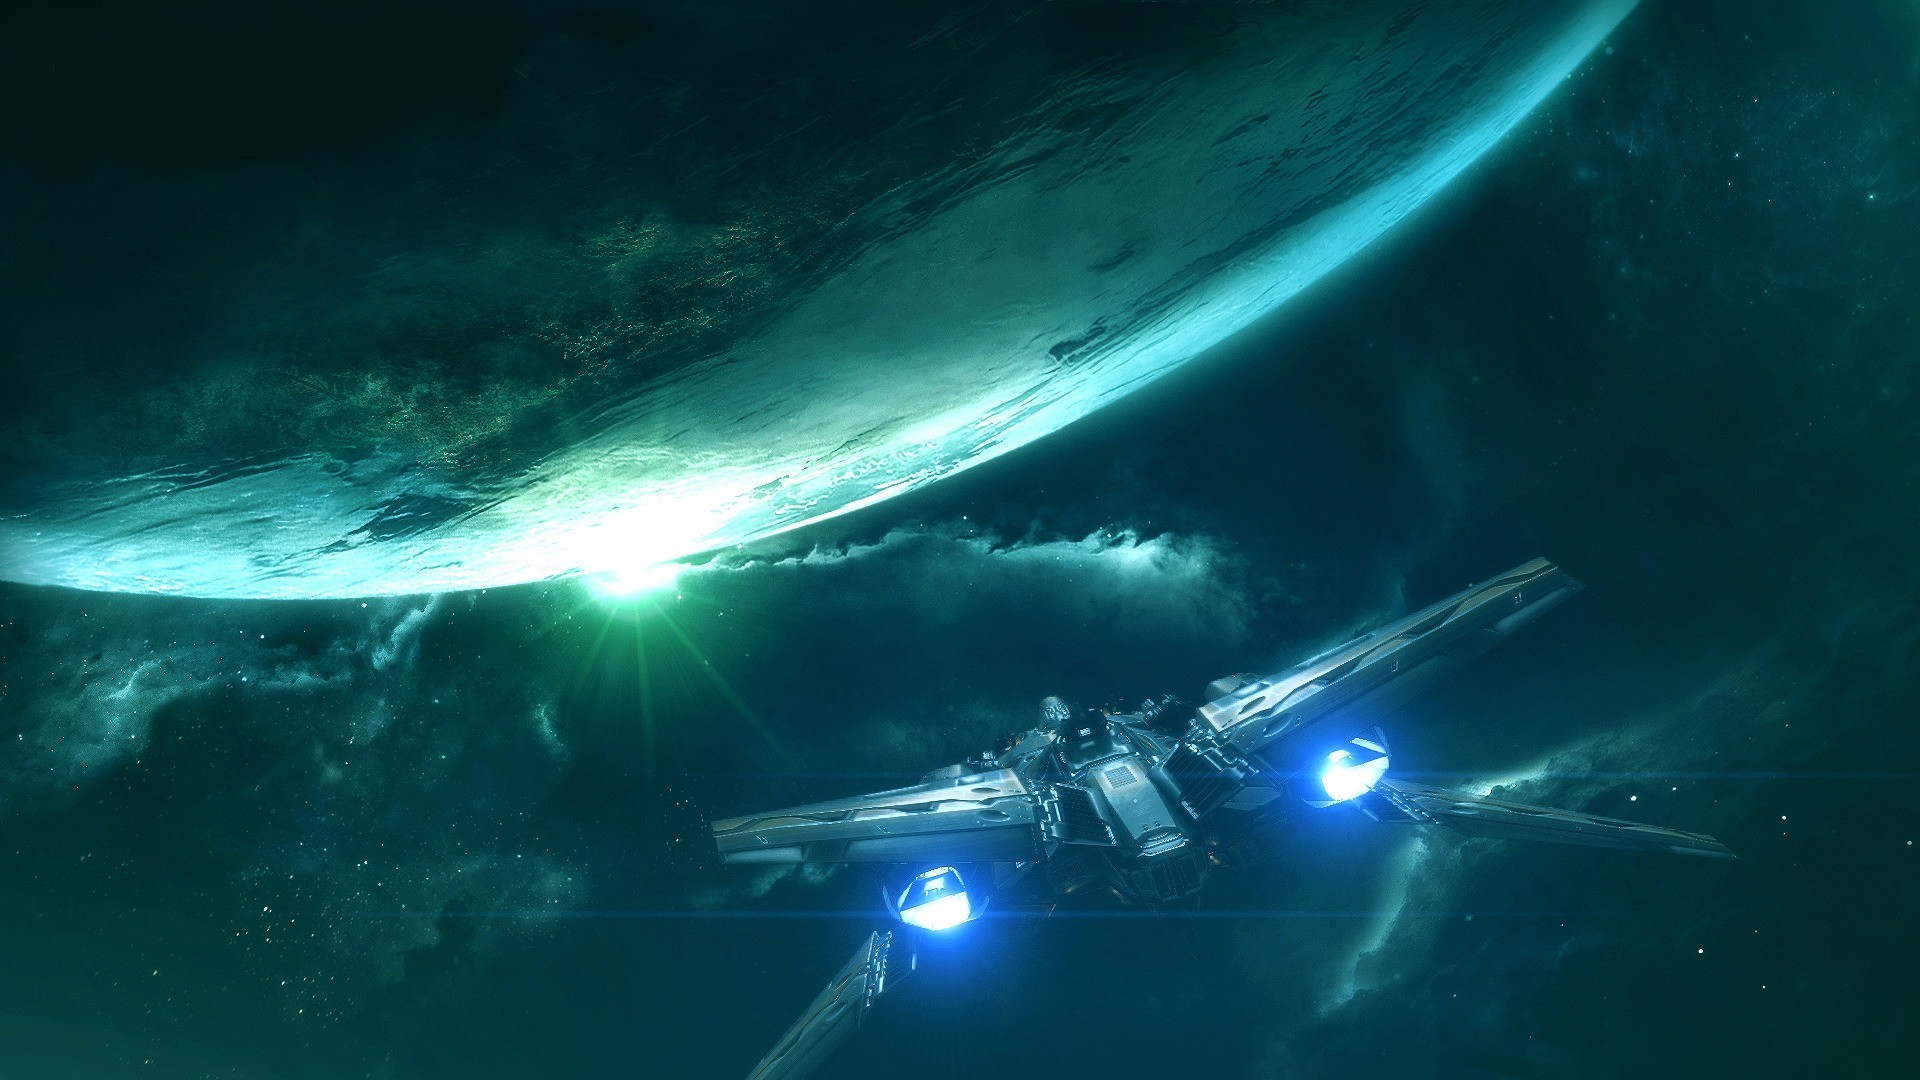 Digital Art Space Spaceship Science Fiction Pilote Planet Space Art Cyan Turquoise 1920x1080